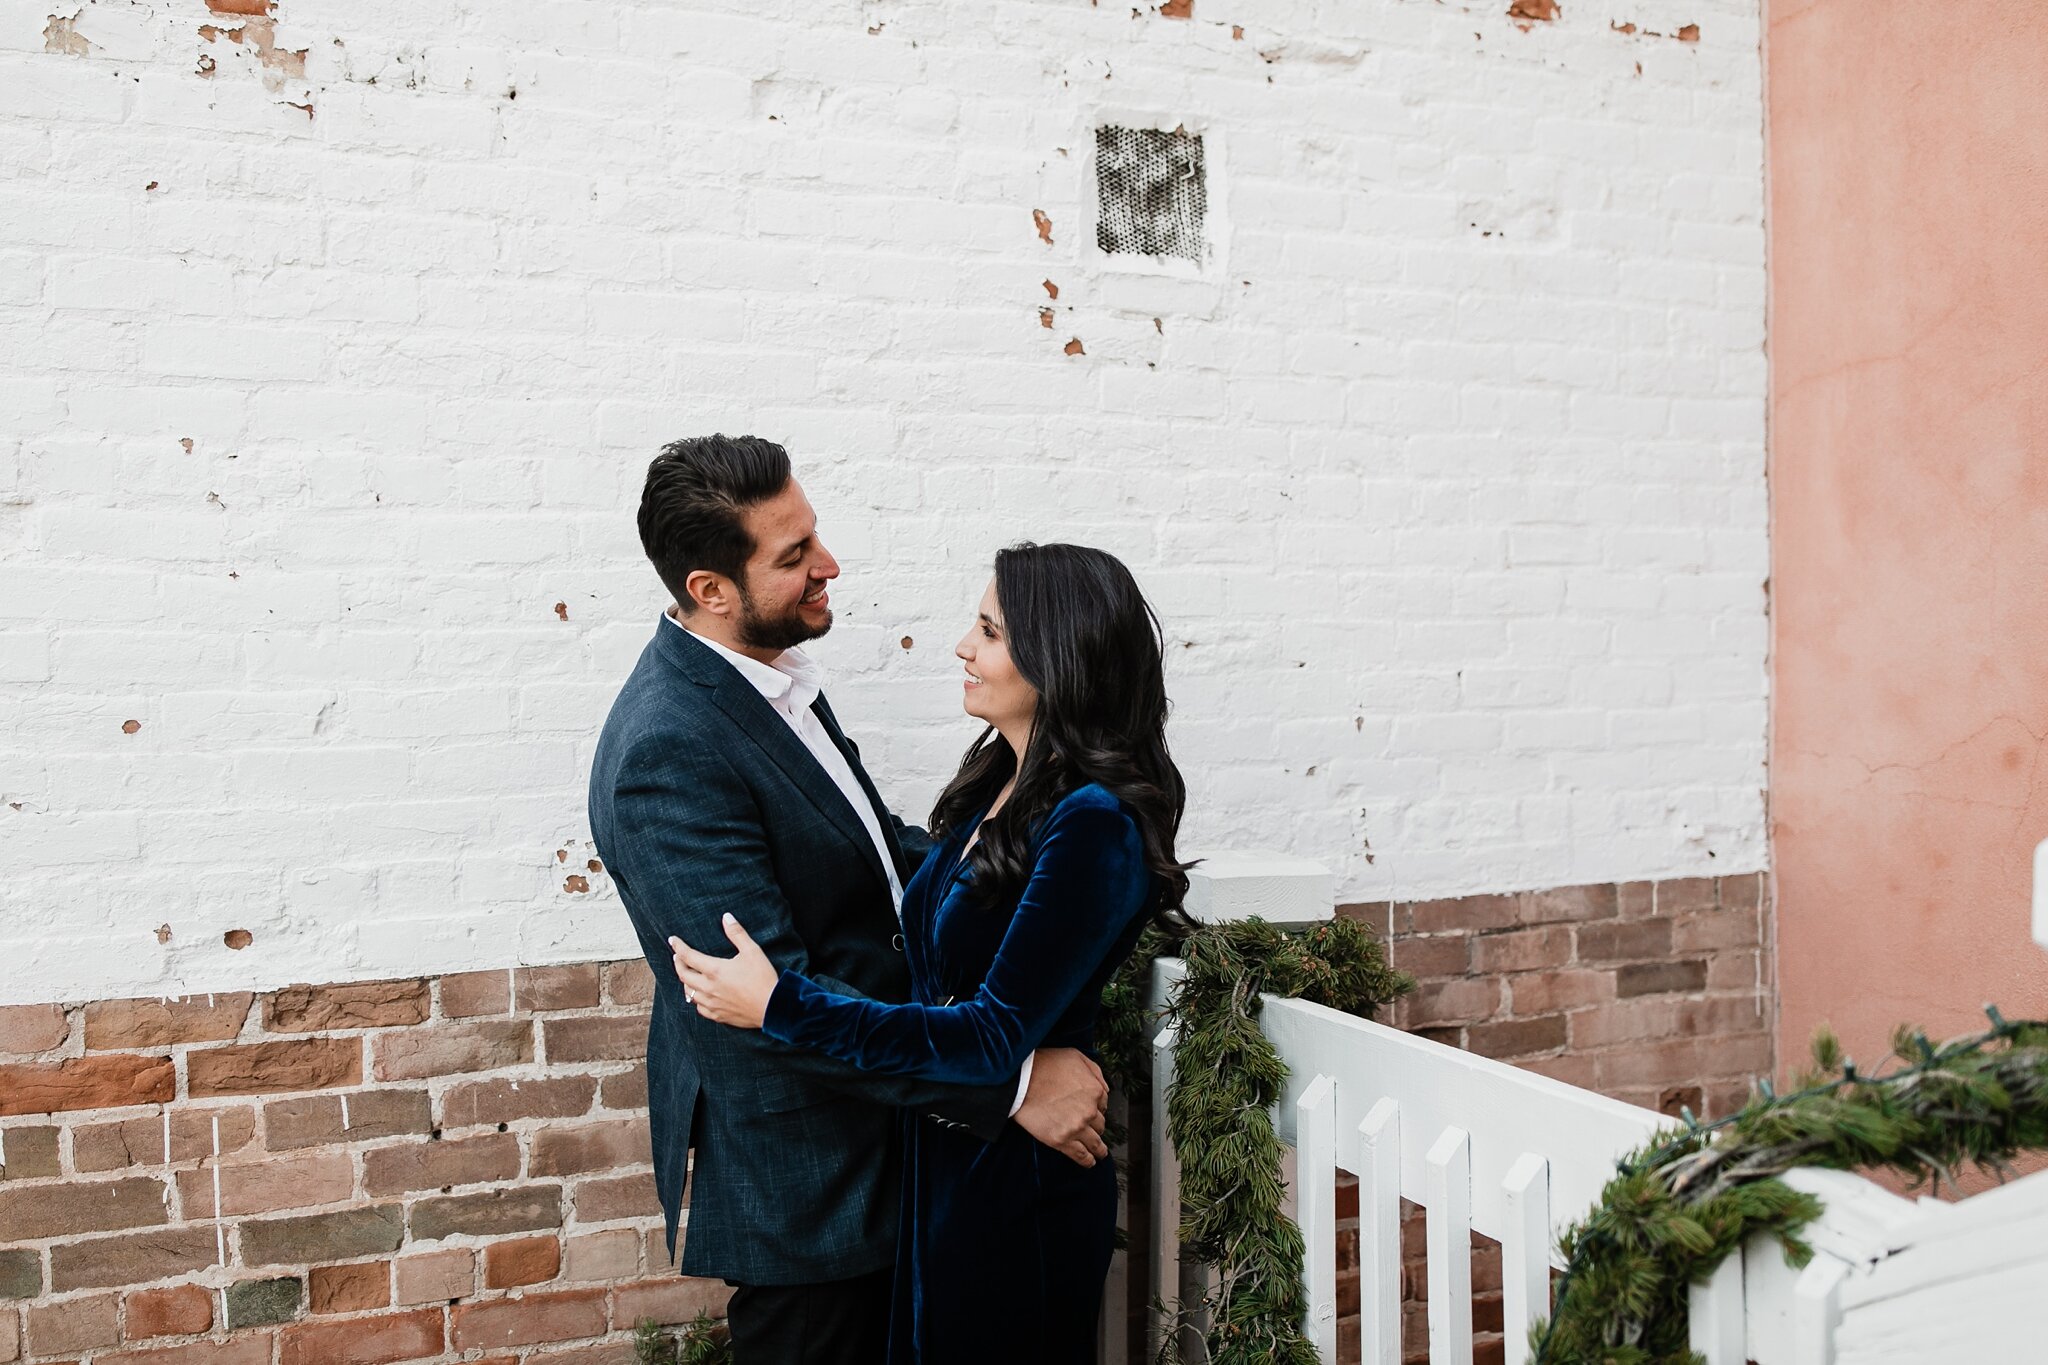 Alicia+lucia+photography+-+albuquerque+wedding+photographer+-+santa+fe+wedding+photography+-+new+mexico+wedding+photographer+-+new+mexico+wedding+-+albuquerque+engagement+-+old+town+engagement+-+christmas+engagement+-+holiday+engagement_001.jpg